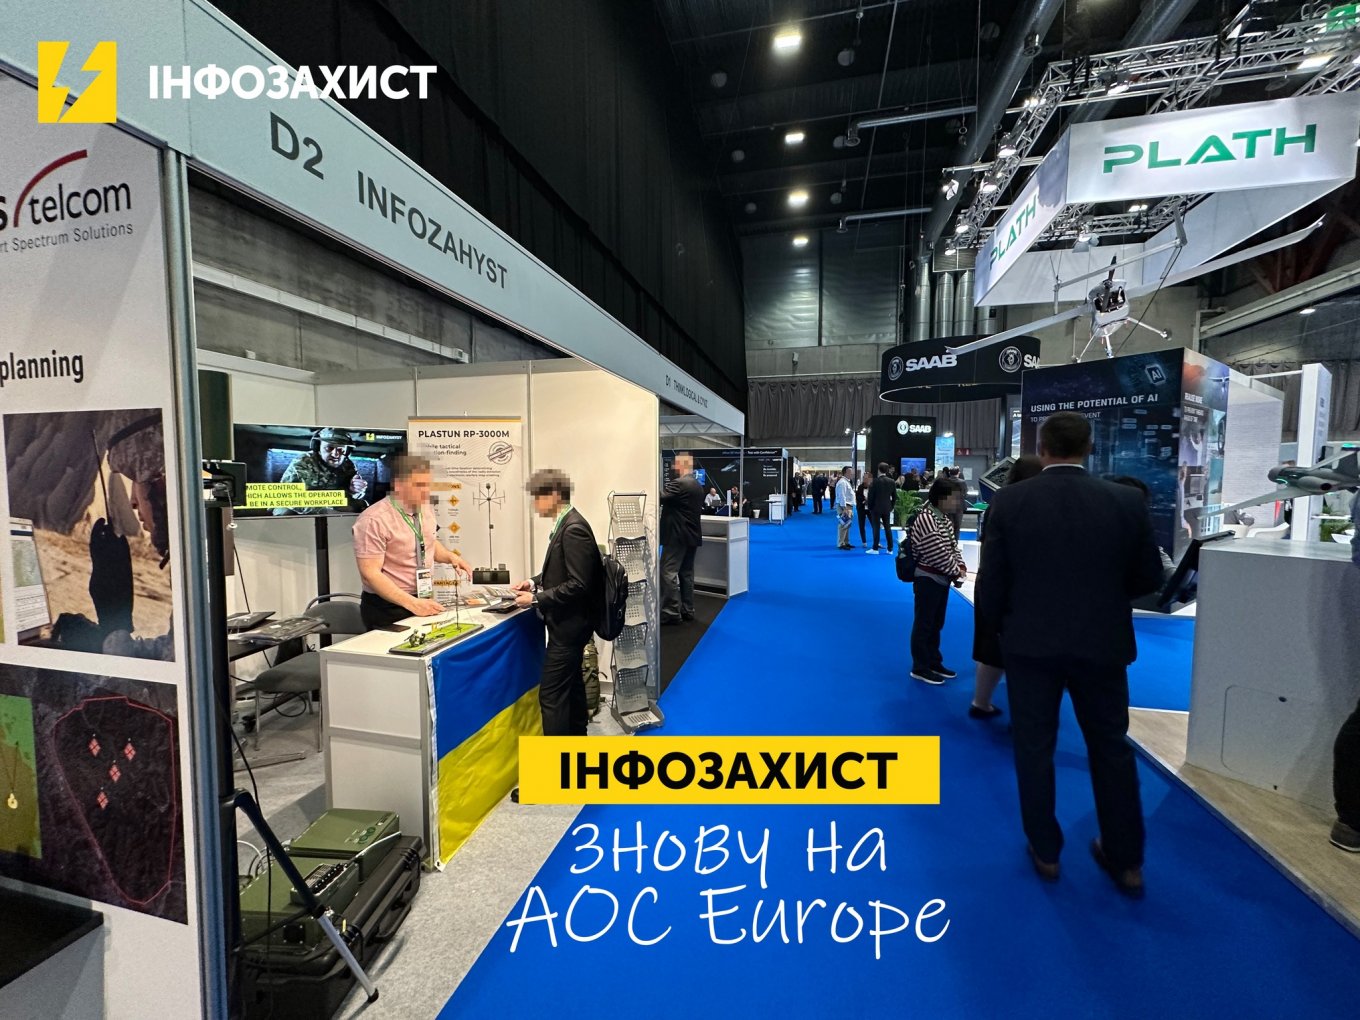 Infozahyst's booth at EOC Europe 2024 / Defense Express / Western Armies Still Underestimate the Threat of FPV Drones and Small UAVs, Ukrainian EW Manufacturer Says